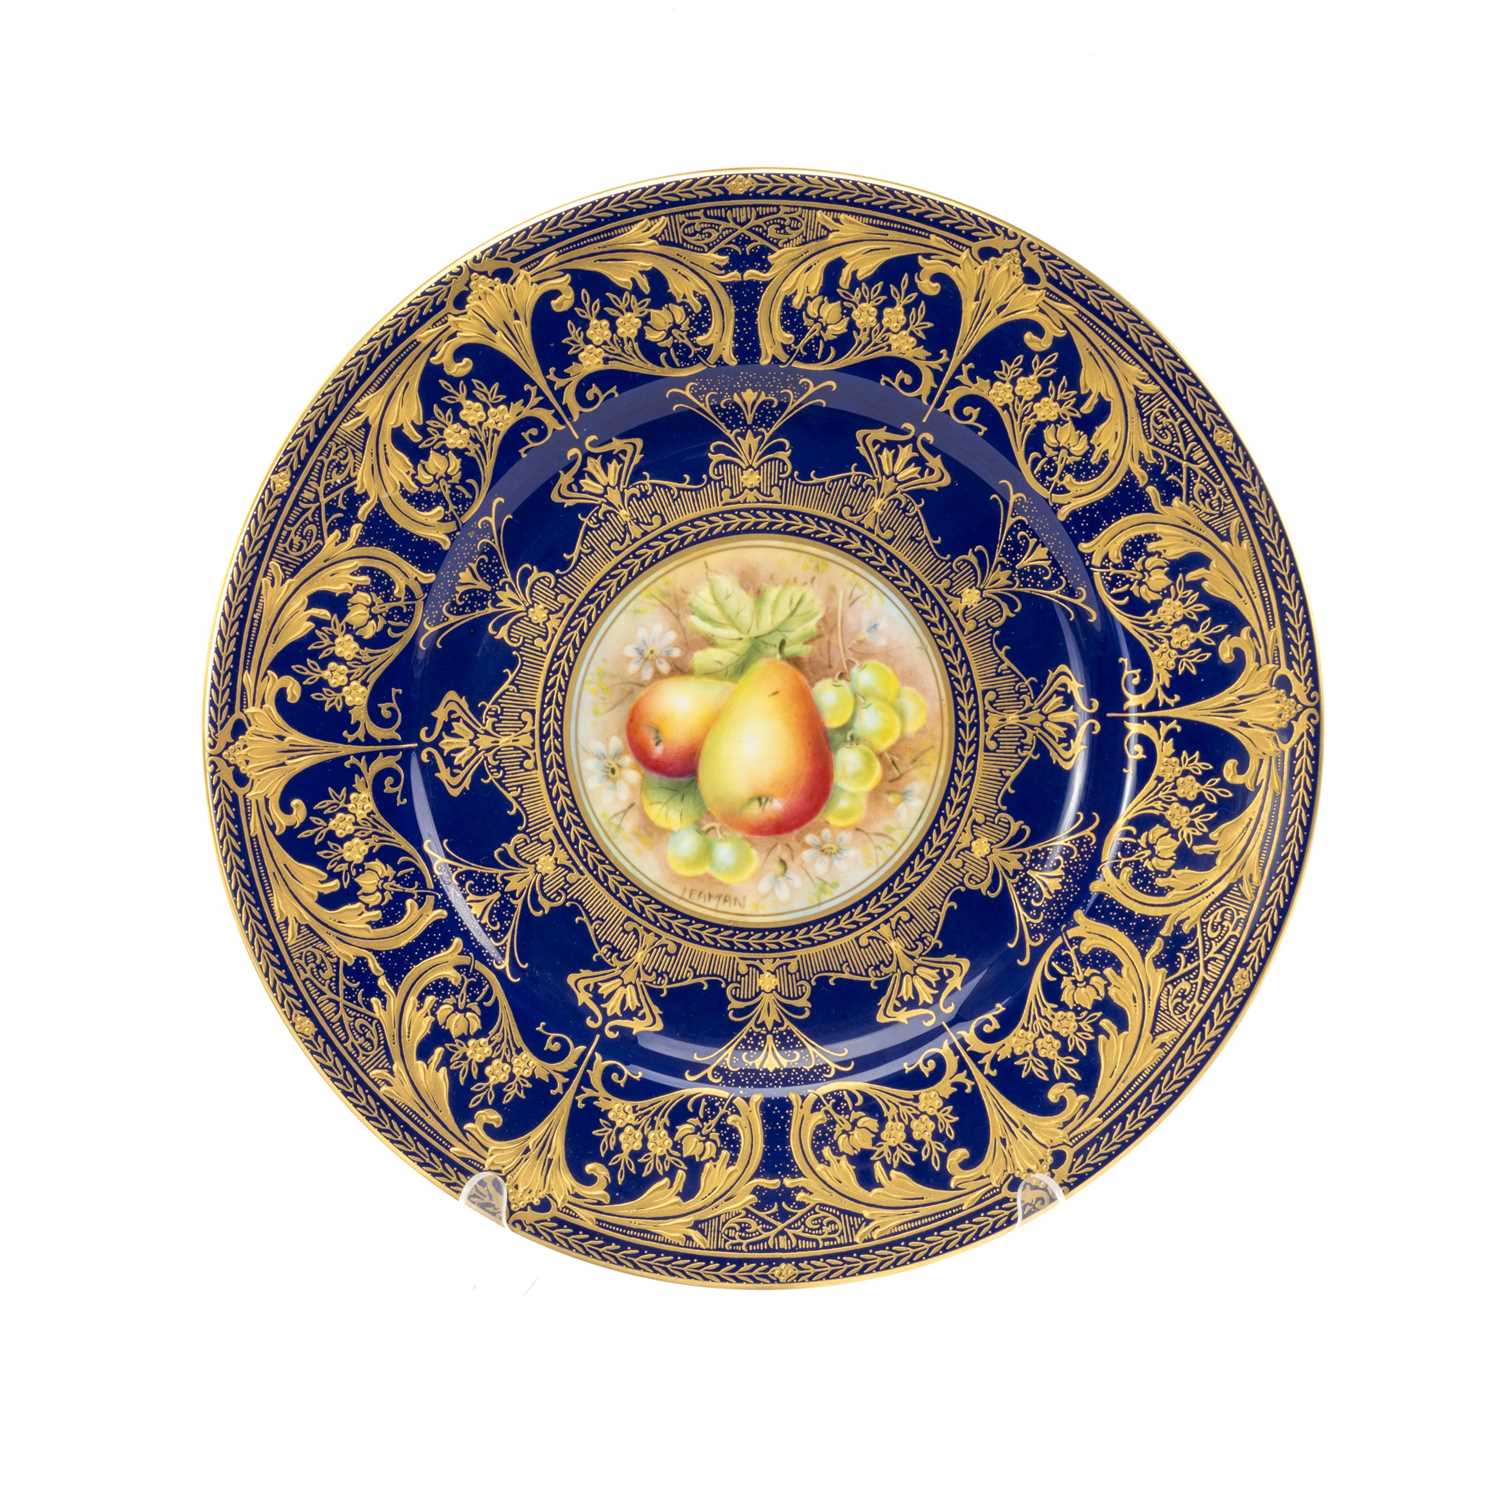 FINE ROYAL WORCESTER PORCELAIN PAINTED CABINET PLATE, centre painted by Brian Leaman with pears